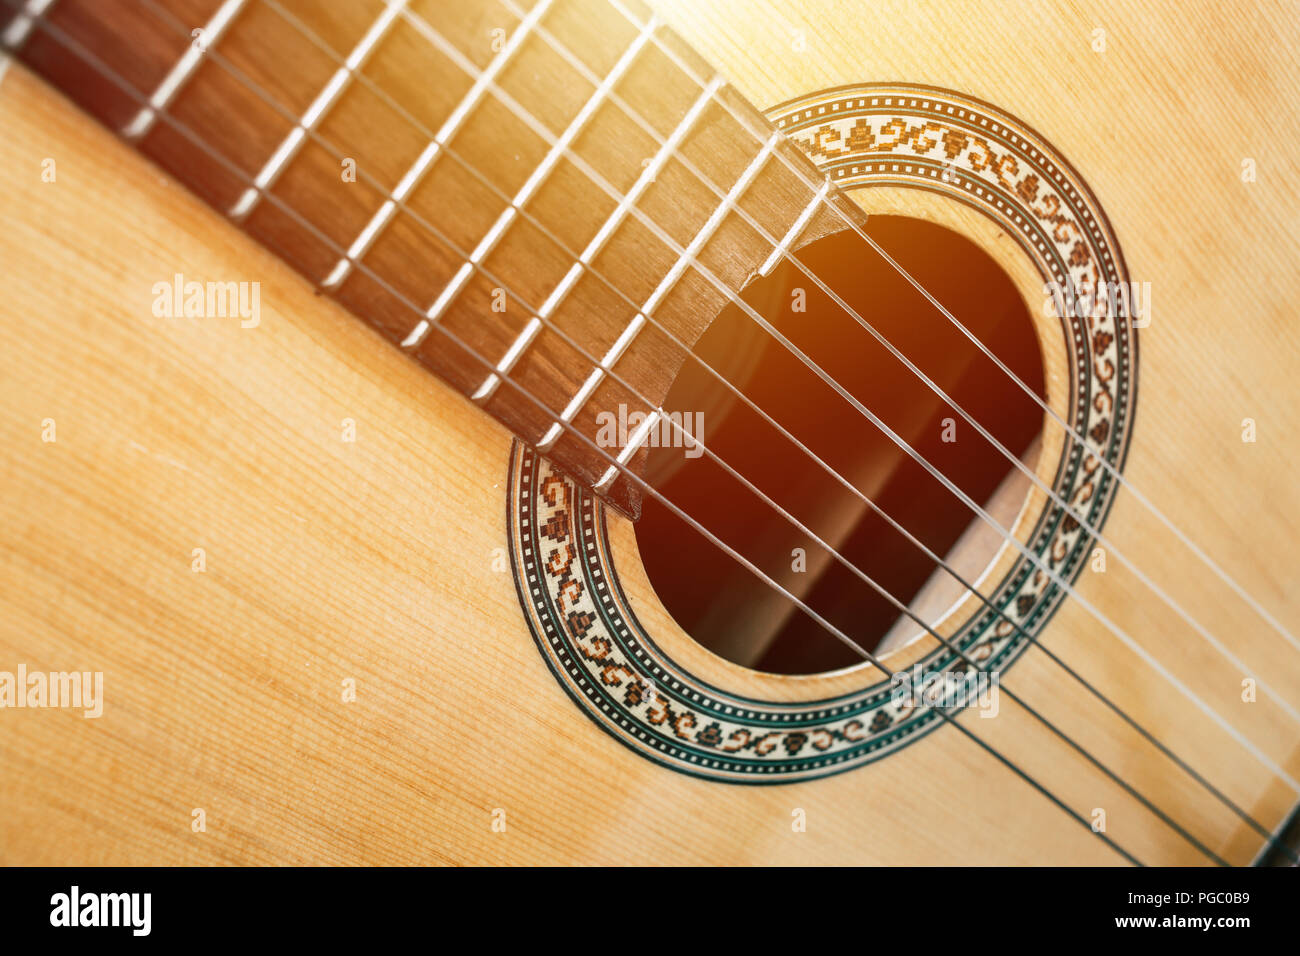 acoustic guitar sound hole string music instrument Stock Photo